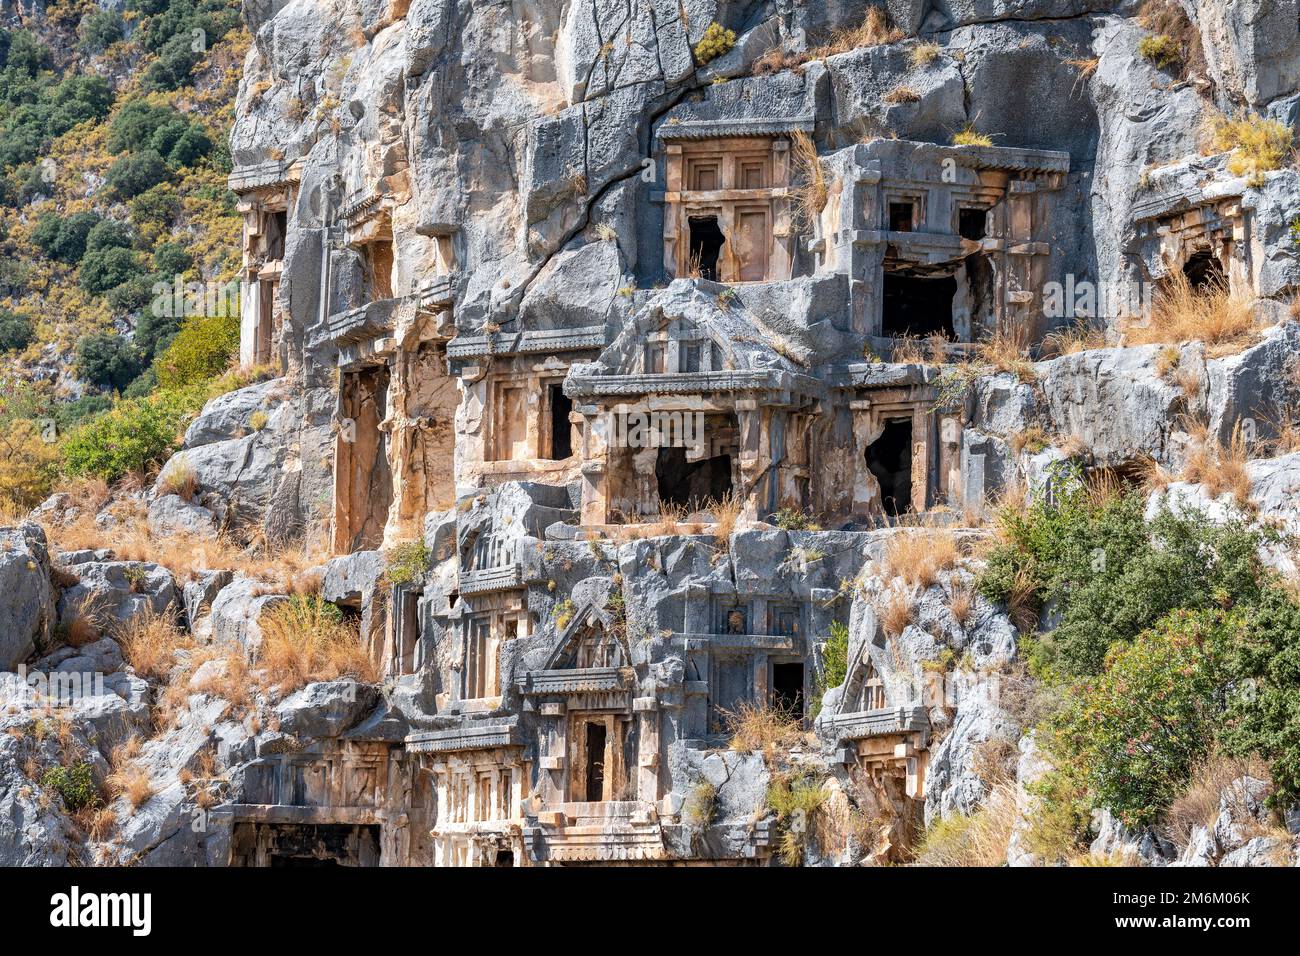 Rock-cut tombs in the ancient city of Myra, Turkey. Stock Photo